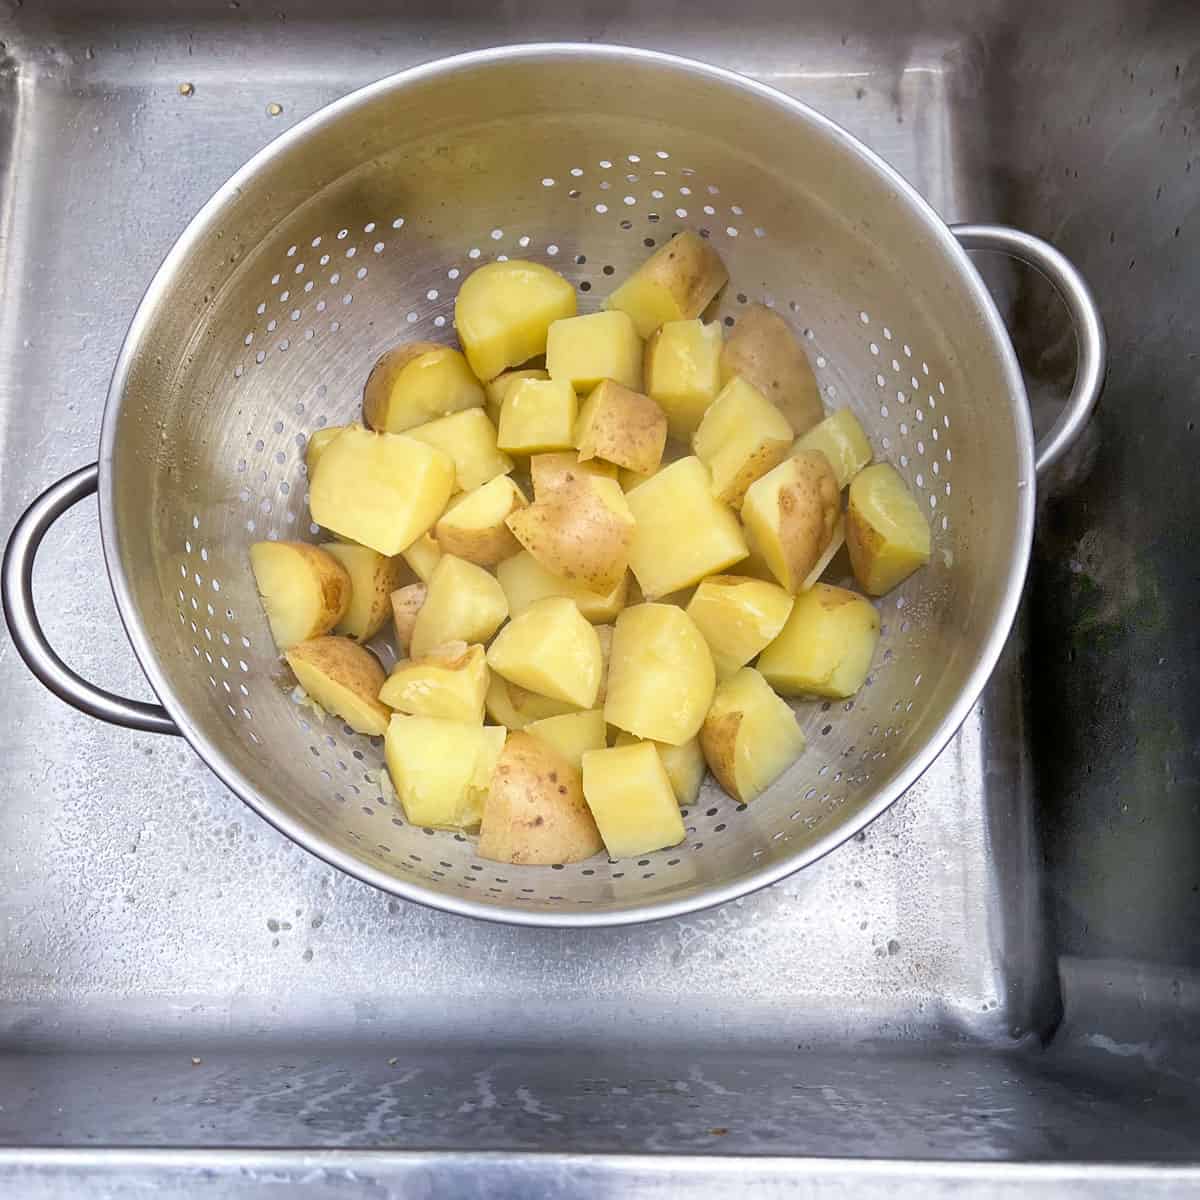 chunks of boiled potatoes draining in a colander in the sink.